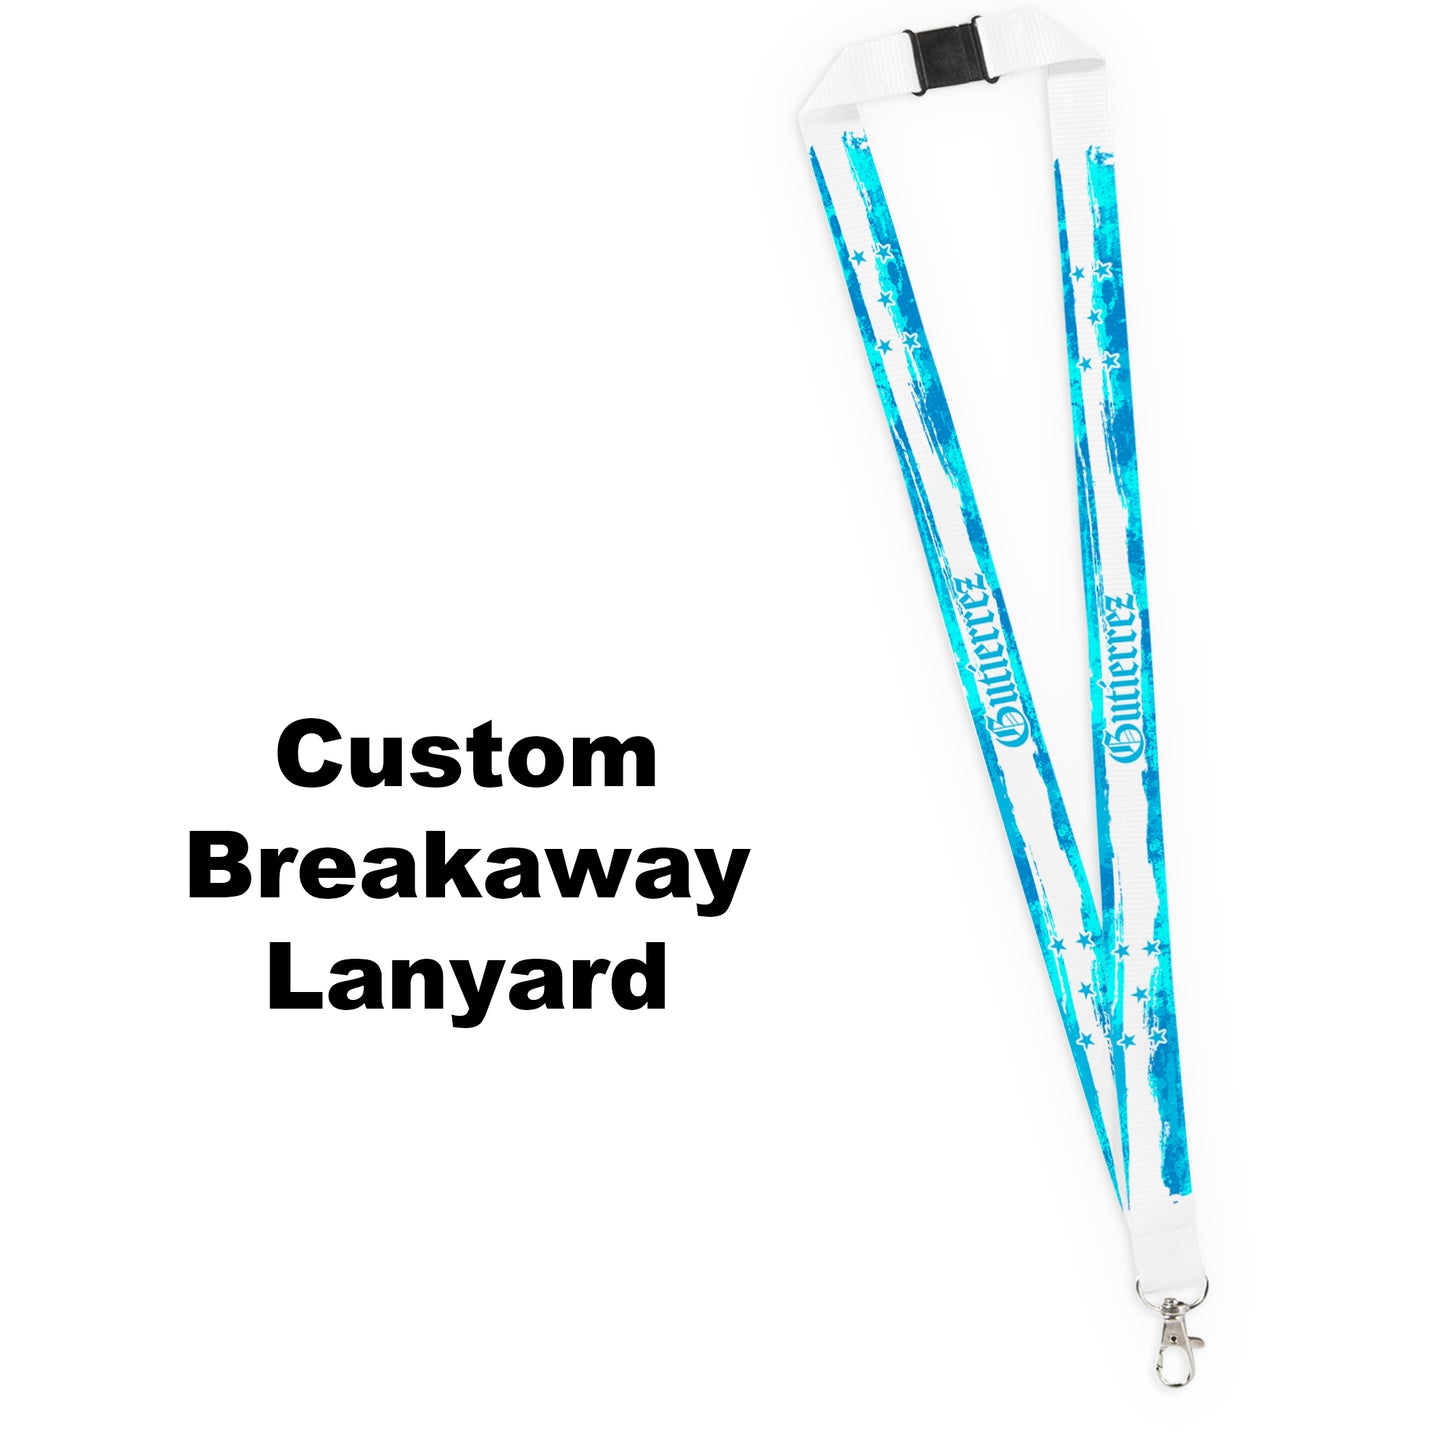 Pick Your World Flags - Artistic Personalized Name Lanyard - Many Flags to Choose From